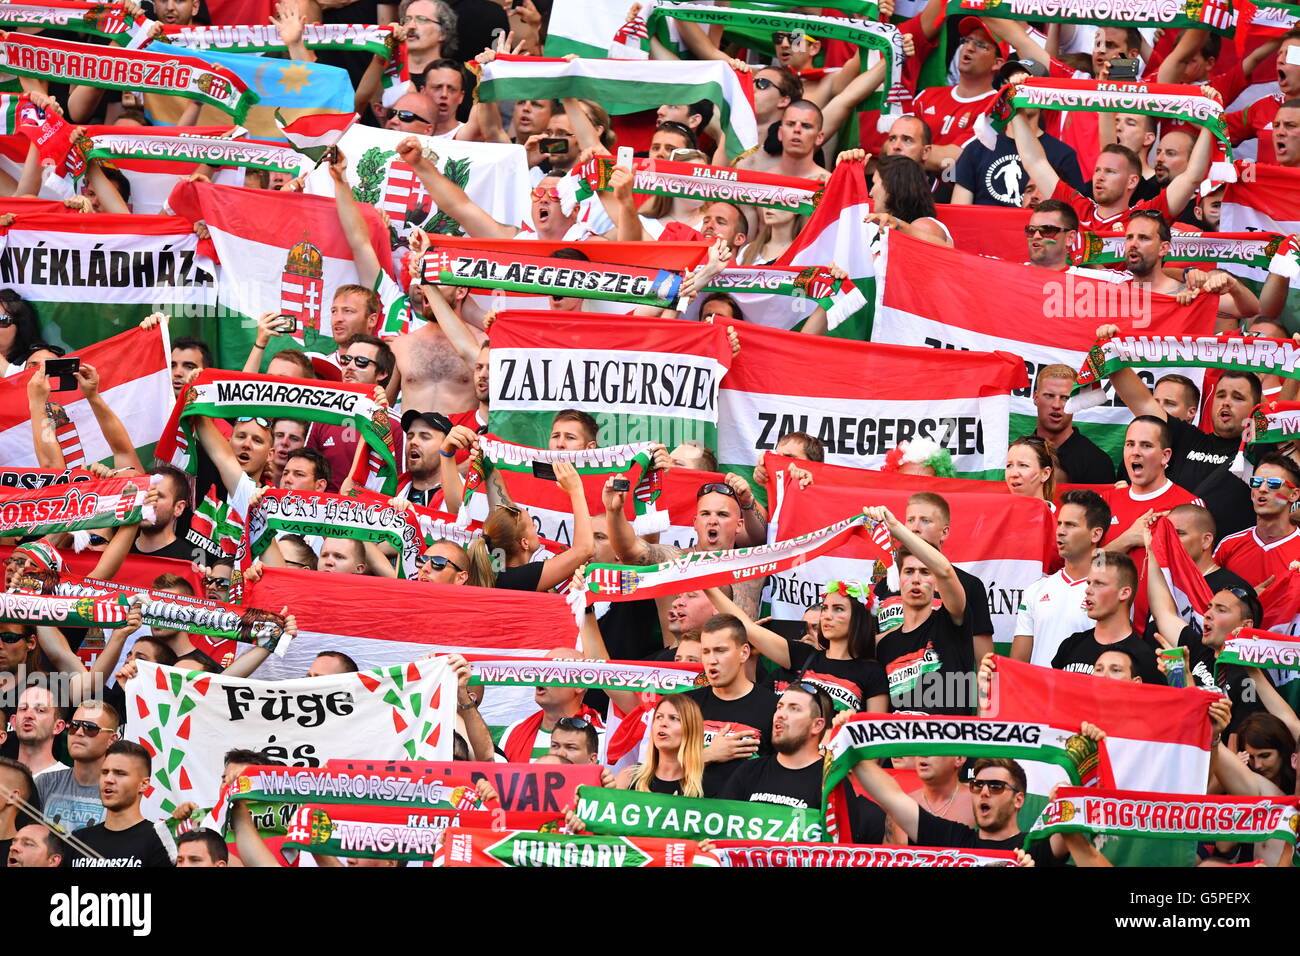 Lyon, France. 22nd June, 2016. Supporters of Hungary cheer for their team prior to the UEFA Euro 2016 Group F soccer match between Hungary and Portugal at the Stade de Lyon in Lyon, France, 22 June 2016. Photo: Uwe Anspach/dpa/Alamy Live News Stock Photo